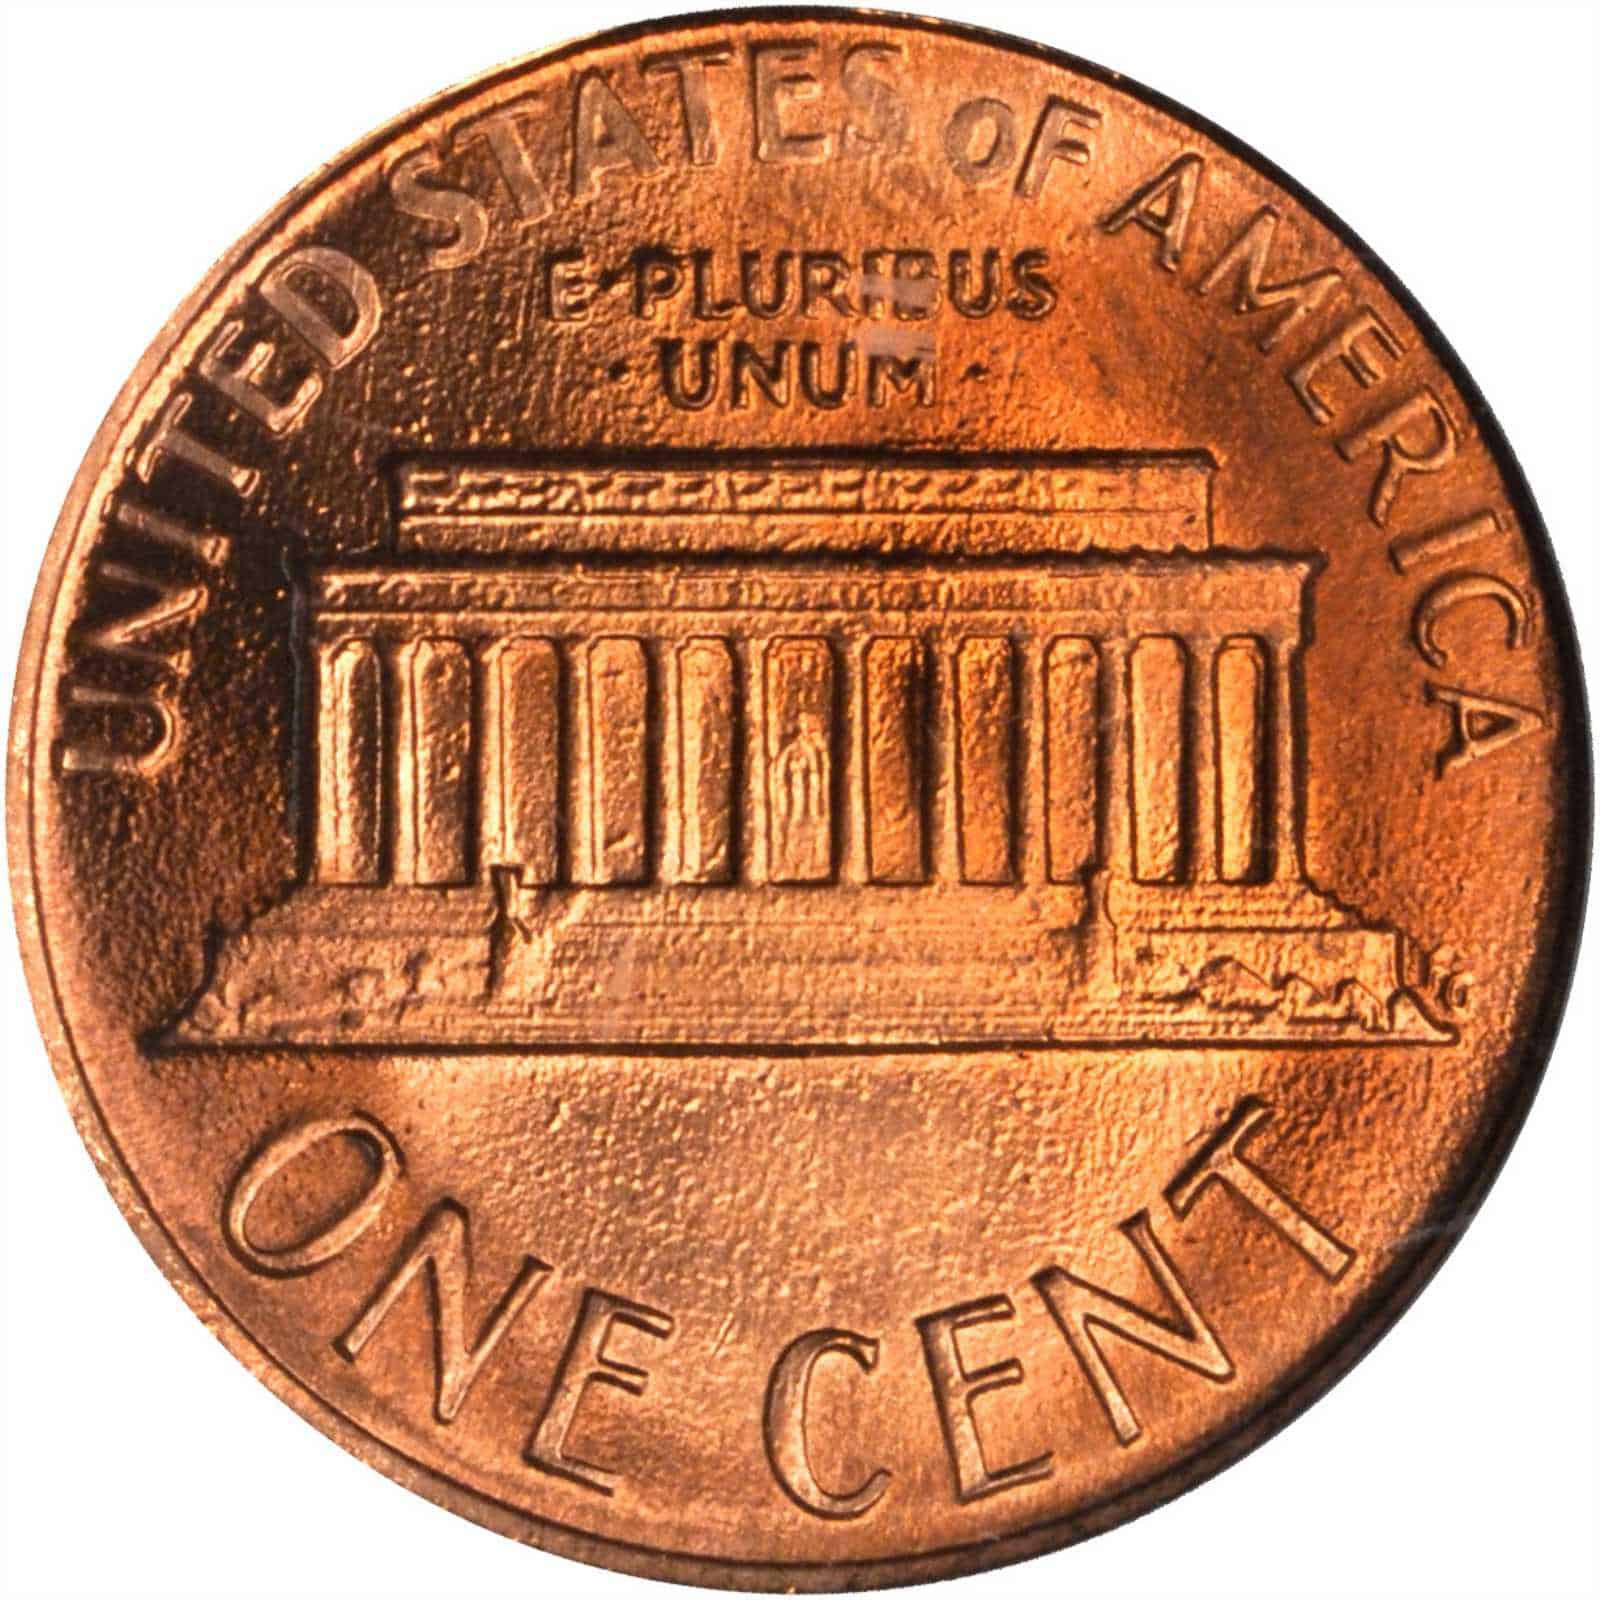 The reverse of the 1986 Memorial (Lincoln) penny